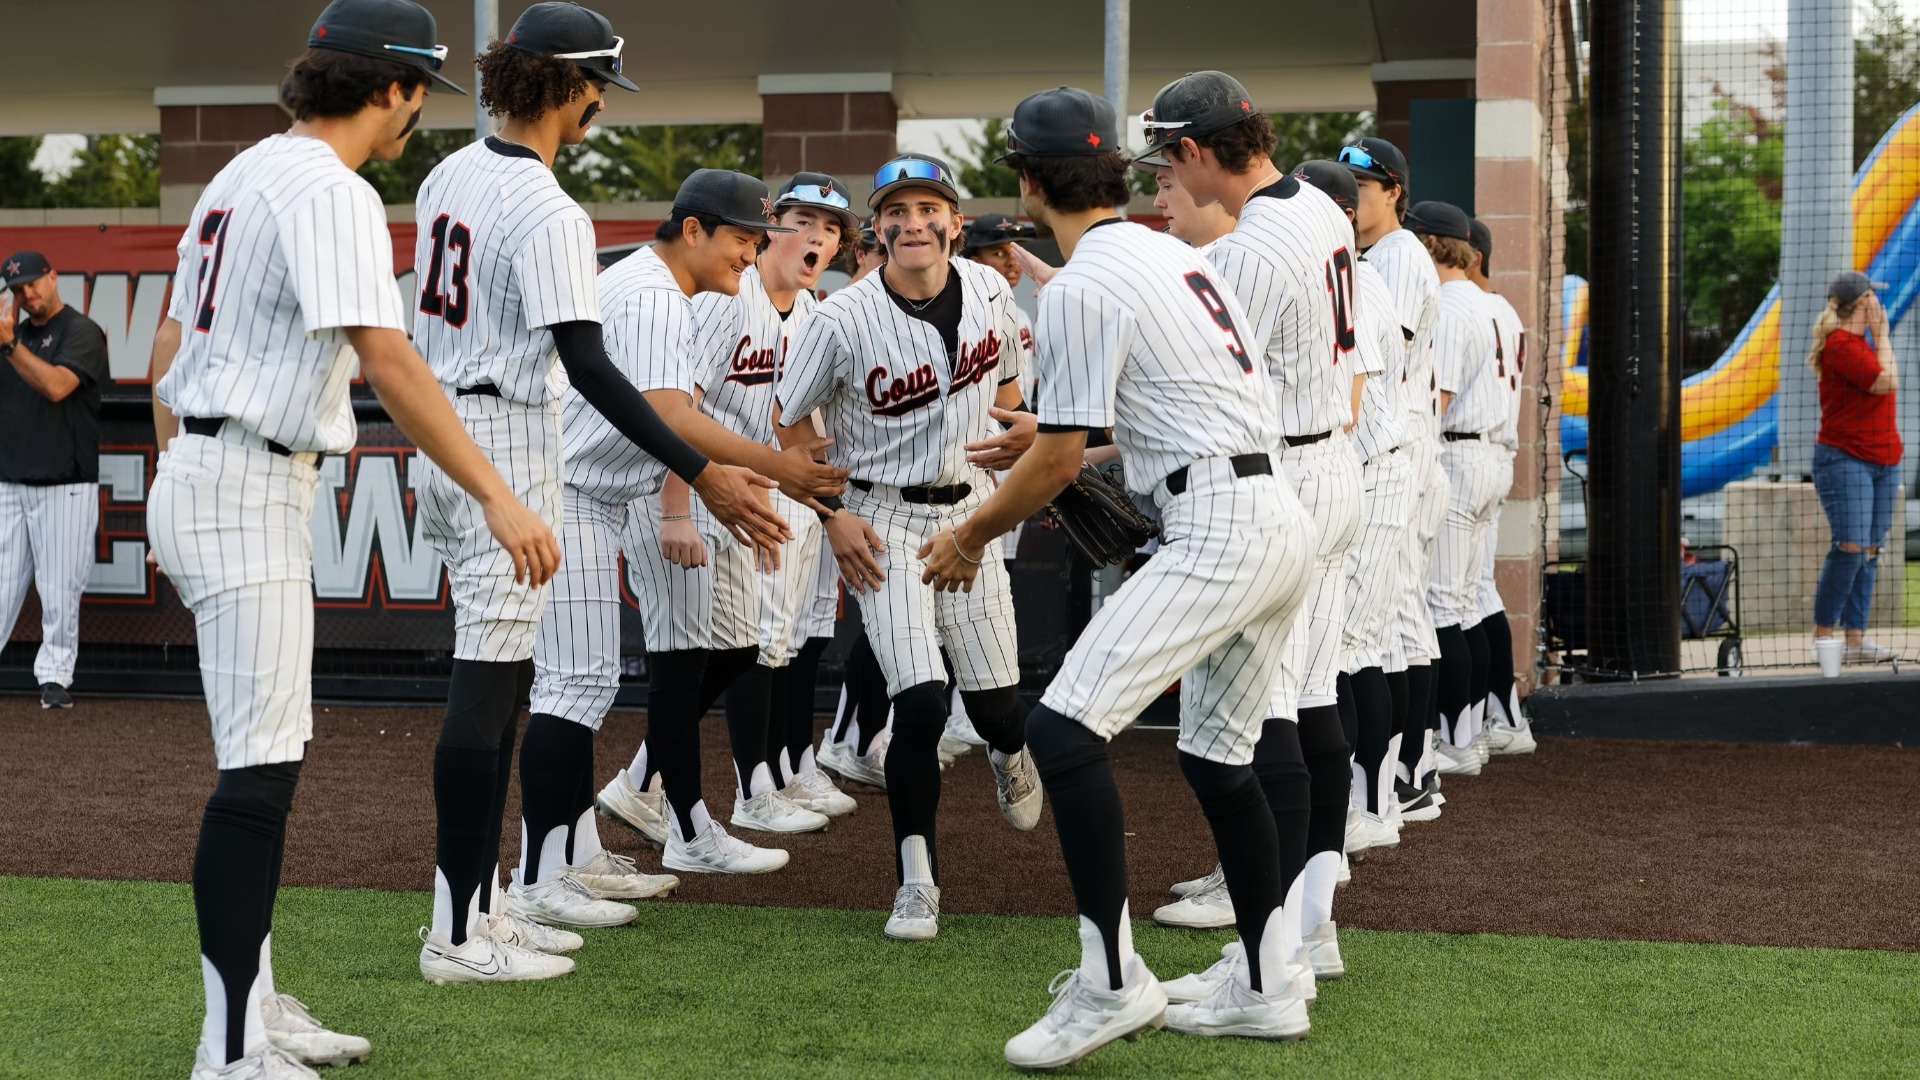 Coppell High SchoolSlide 5 - COPPELL WINS TWO IN THE PLANO WEST SERIES